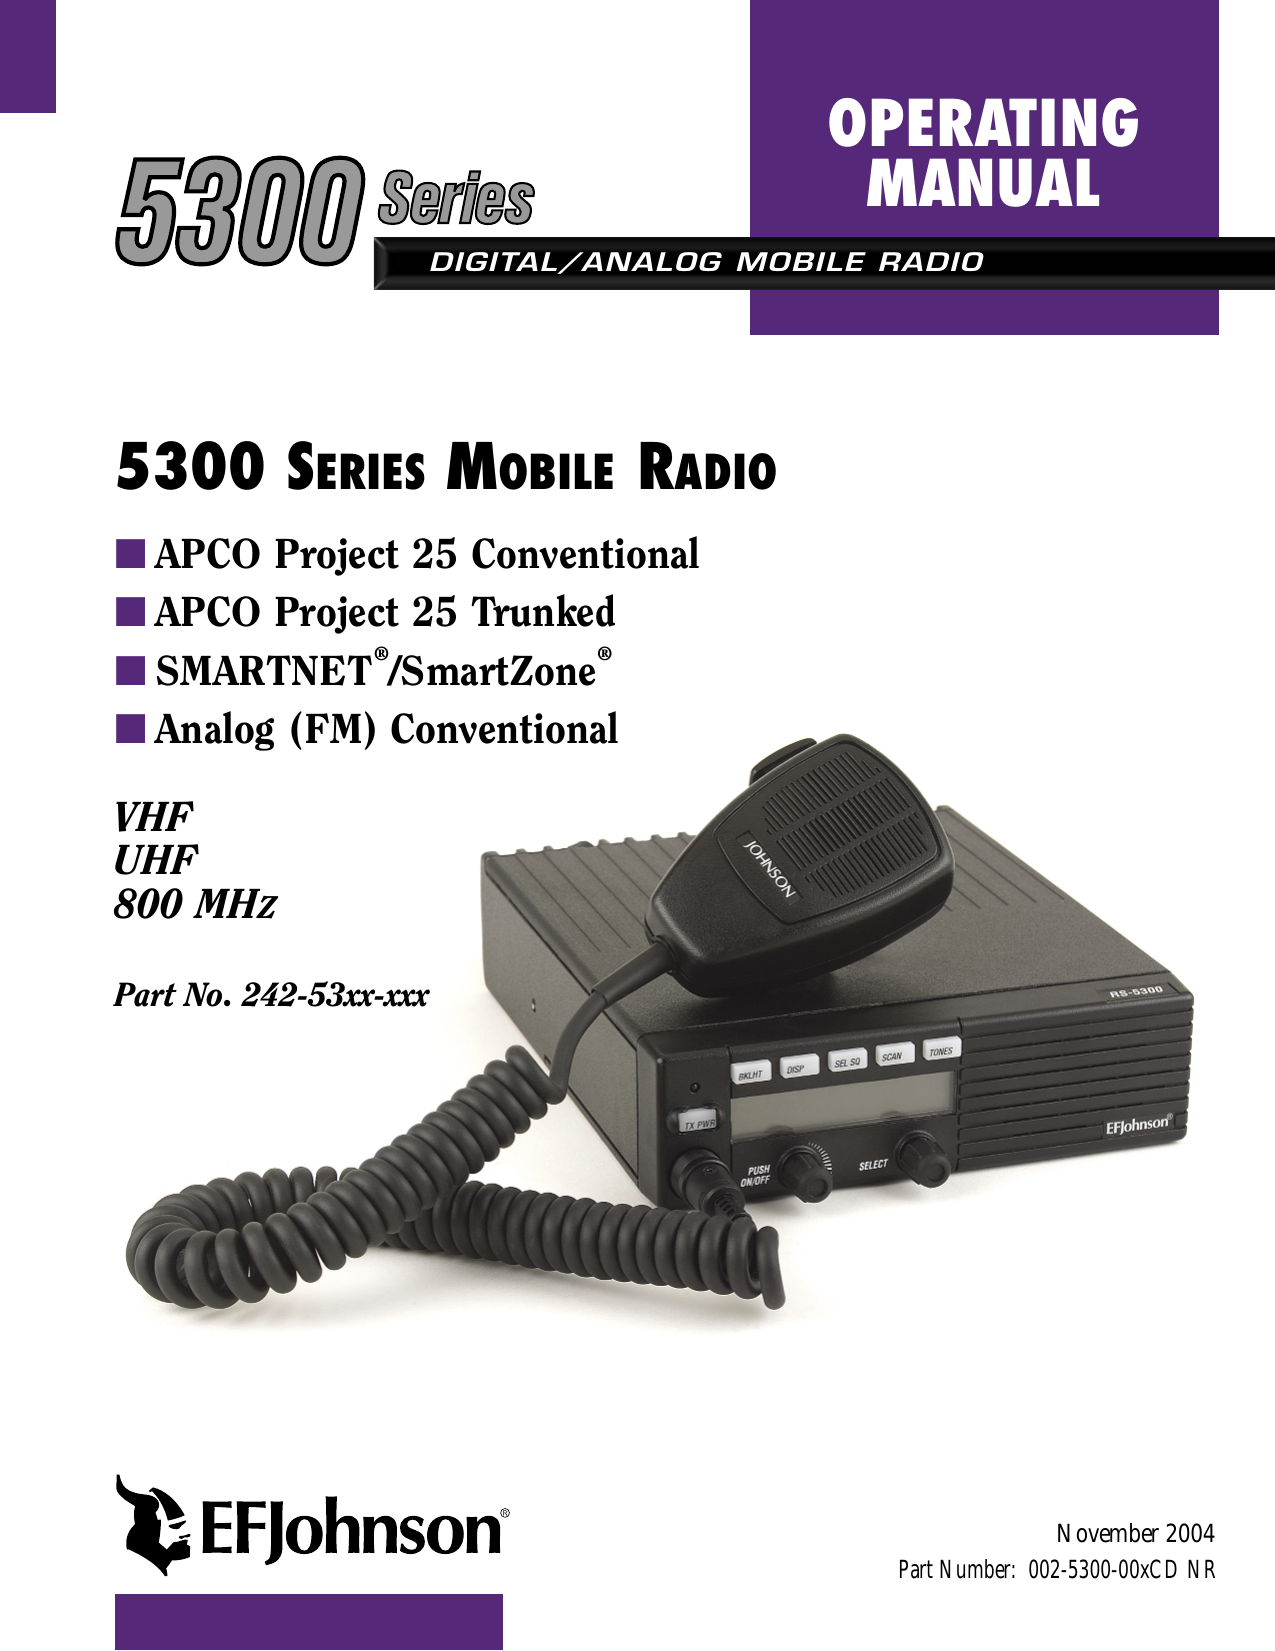 DIGITAL/ANALOG MOBILE RADIOOPERATINGMANUAL5300 SERIES MOBILE RADIO■APCO Project 25 Conventional■APCO Project 25 Trunked■SMARTNET®/SmartZone®■Analog (FM) ConventionalVHFUHF800 MHZPart No. 242-53xx-xxxPart Number:  002-5300-00xCD NRNovember 2004